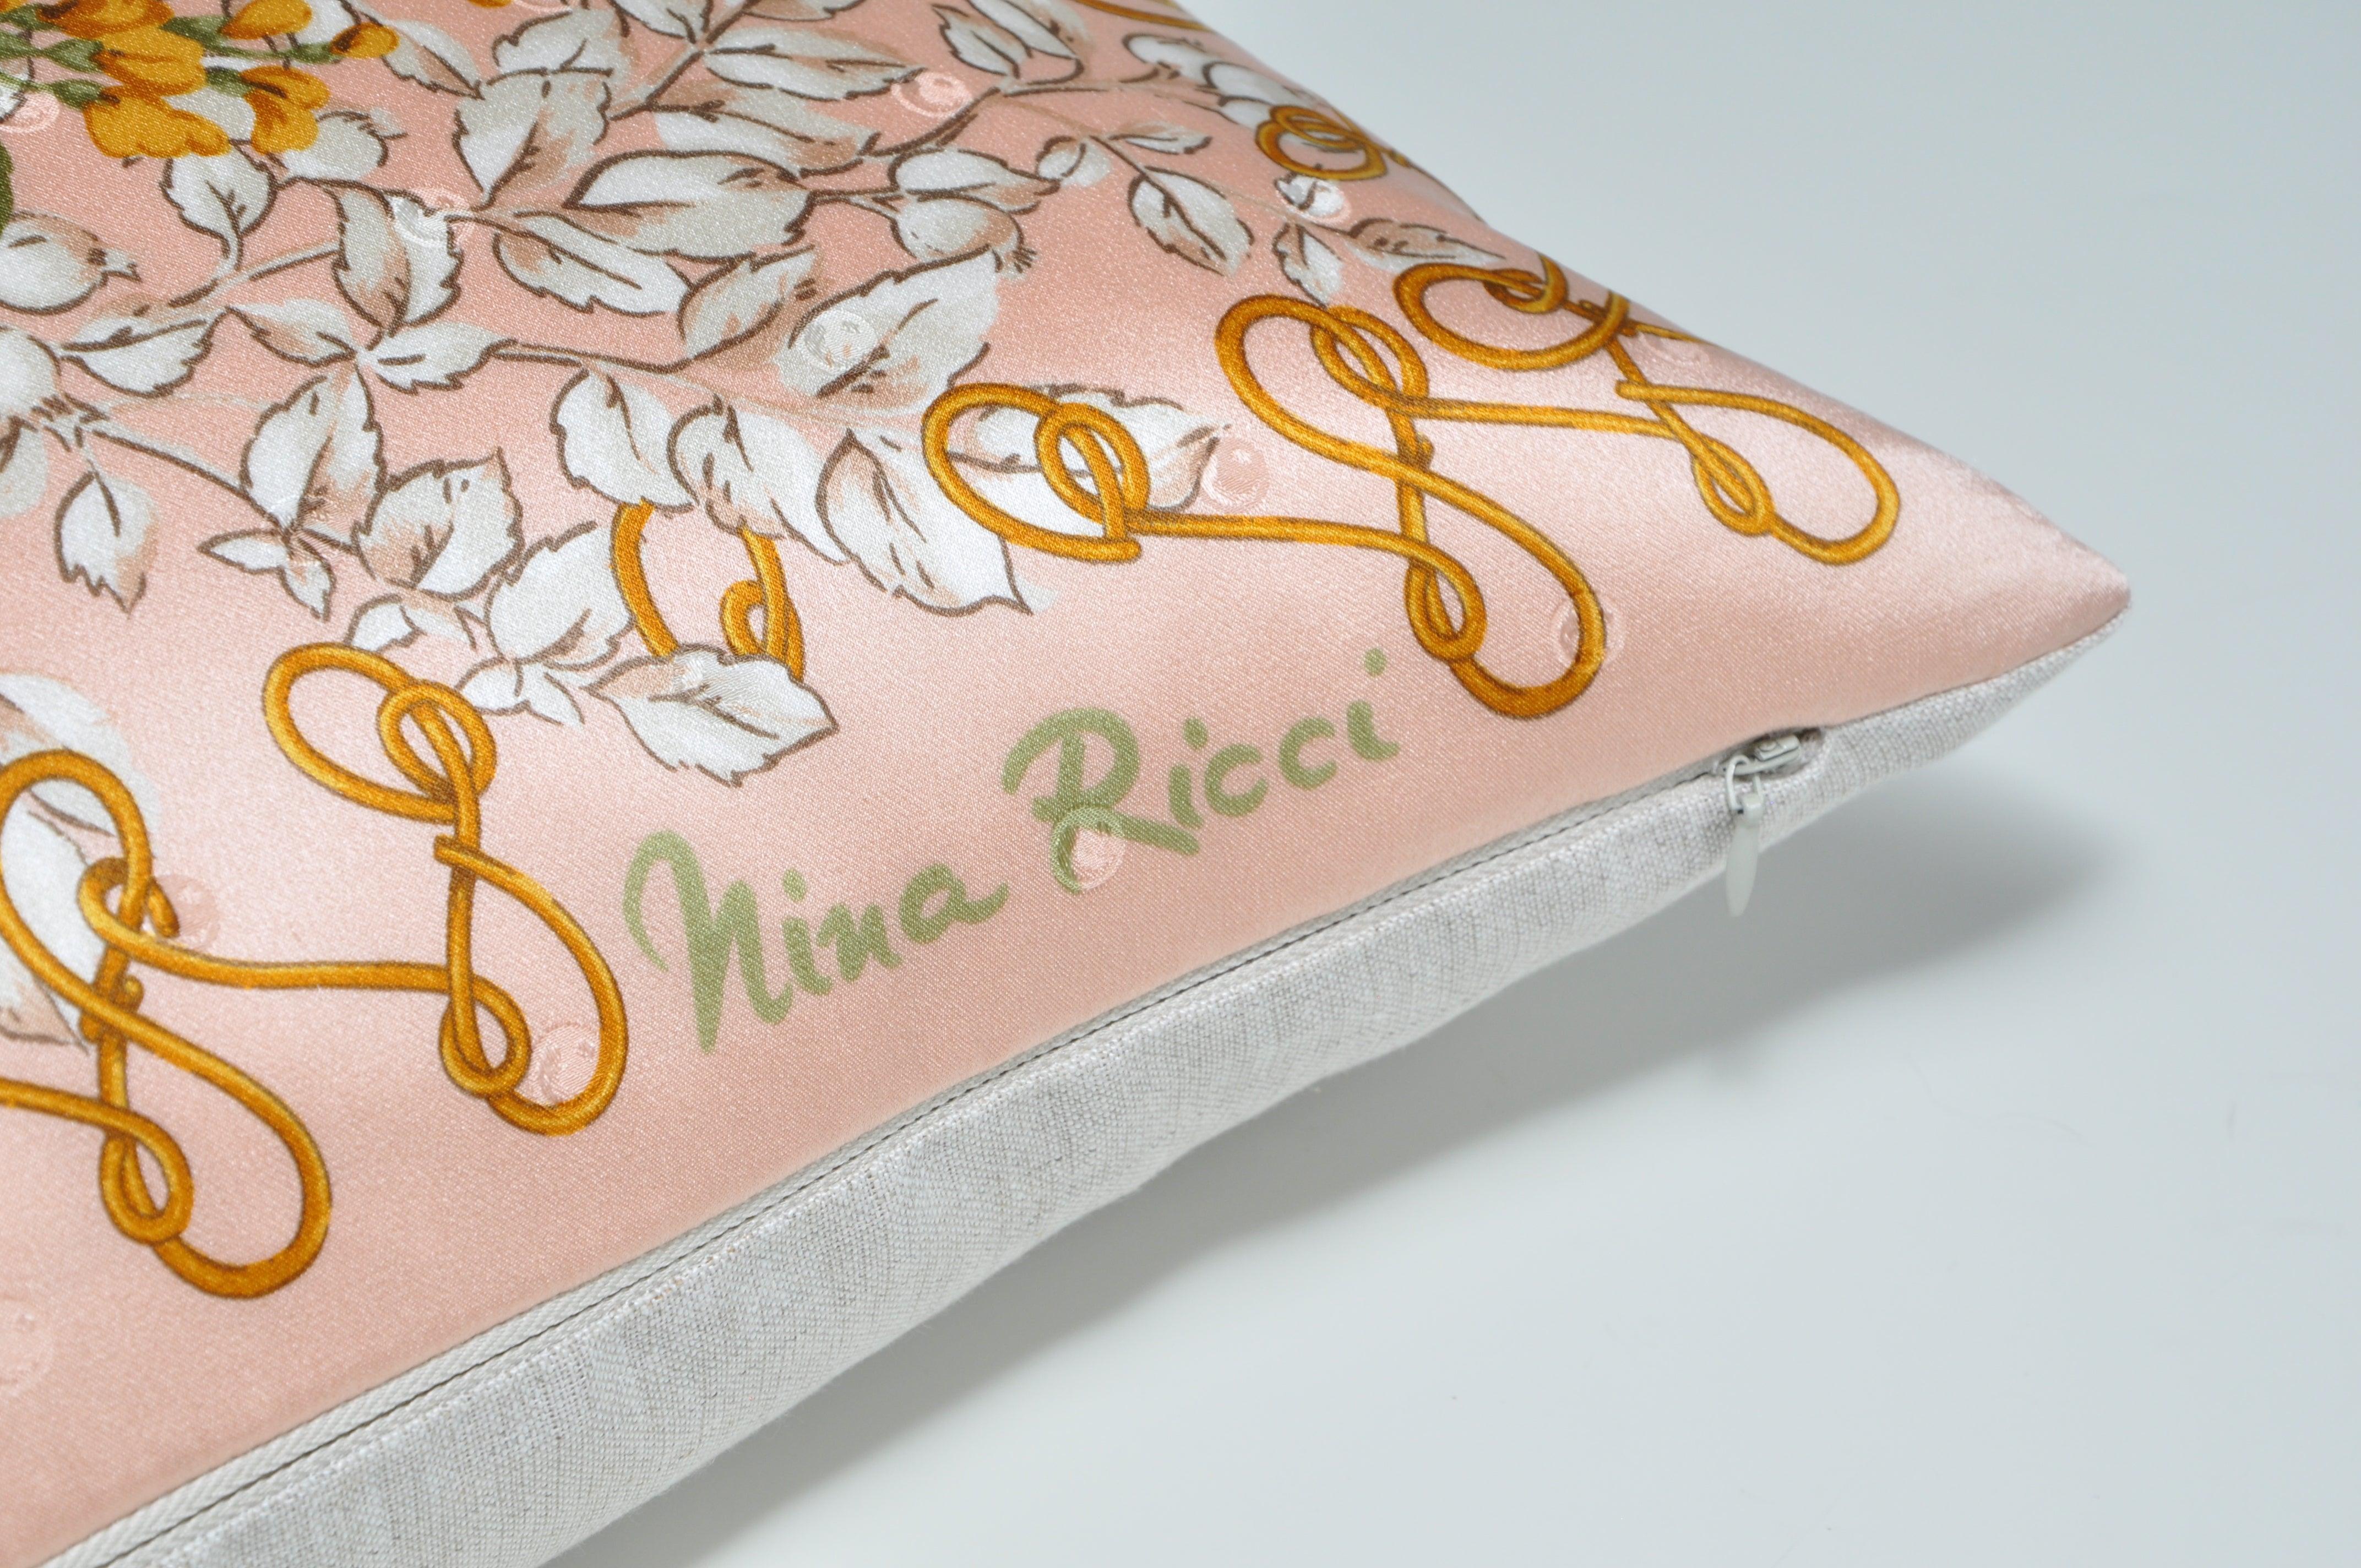 custom made one-of-a-kind luxury cushion created from a beautiful vintage silk Nina Ricci fashion scarf in an exquisite floral pattern. The most sumptuous soft to the touch silk in a soft, feminine peachy pink. A dainty floral picture of foliage and